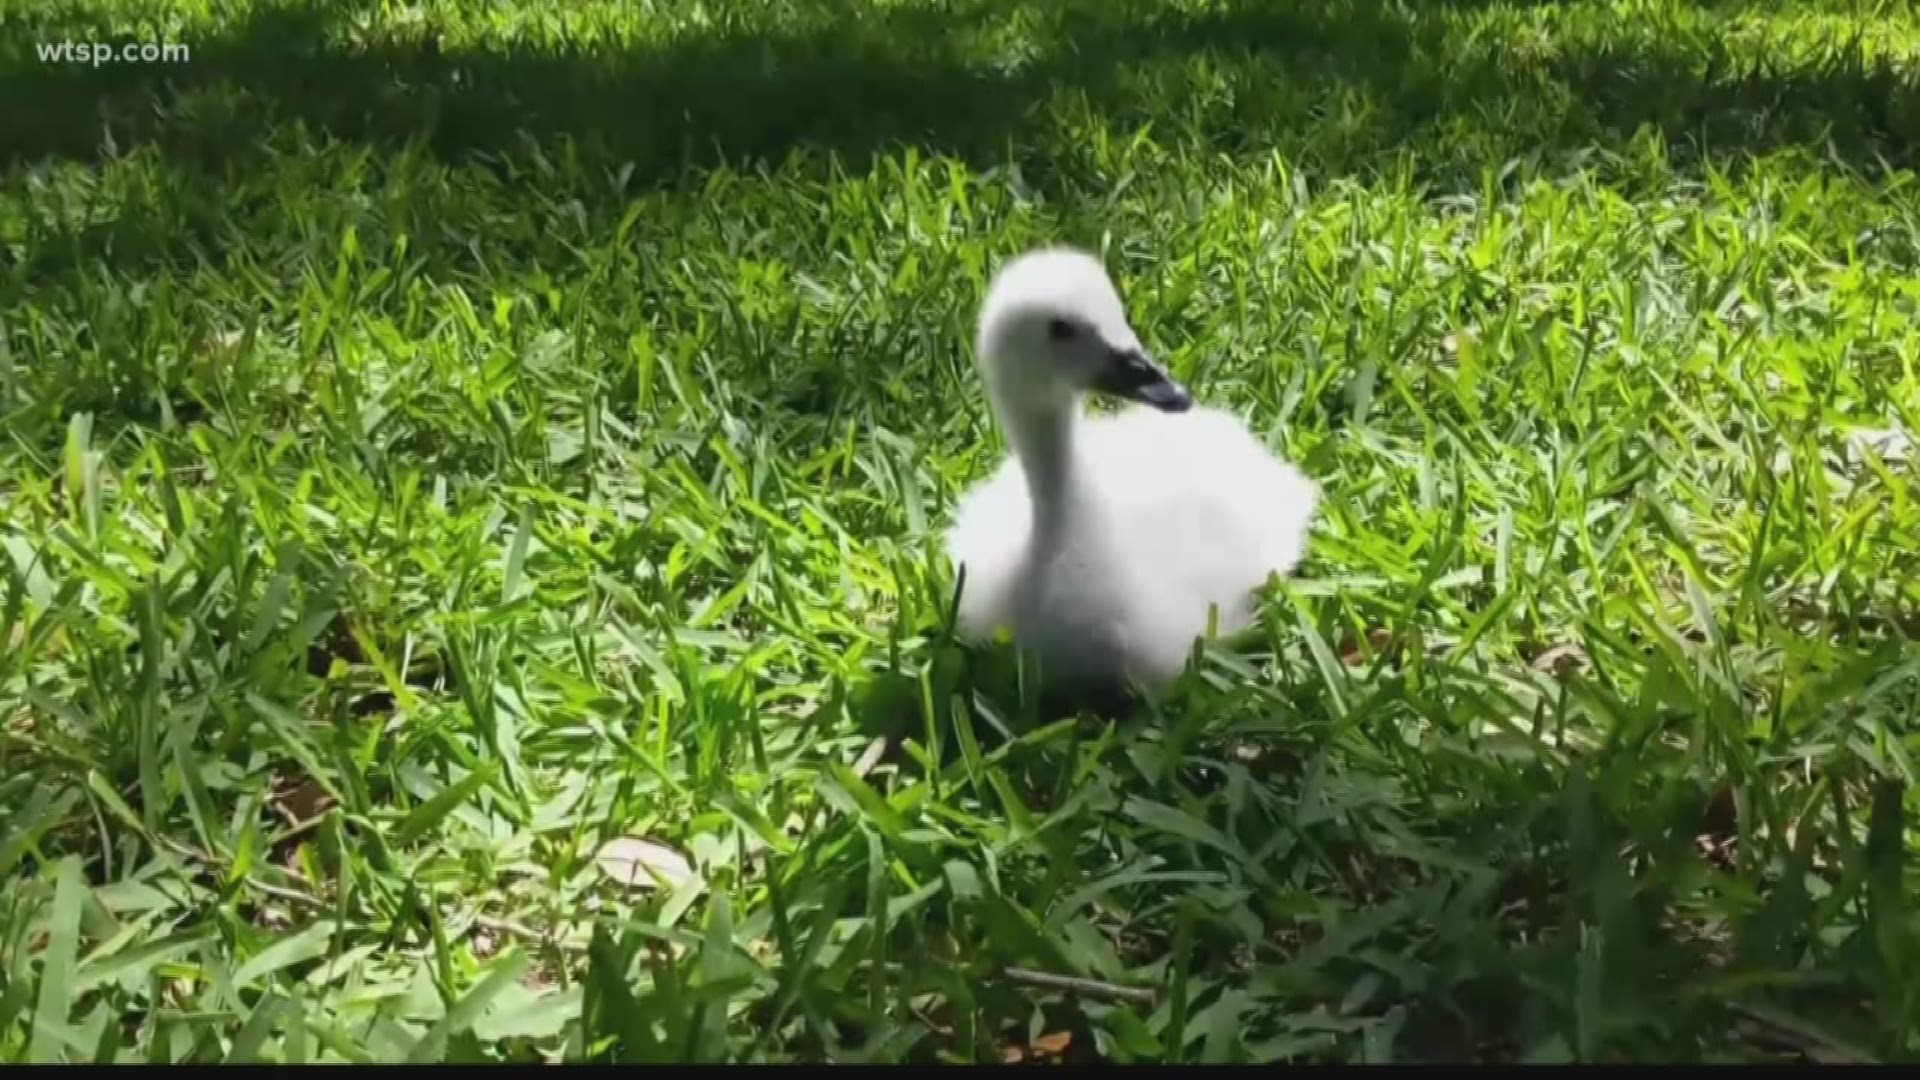 A rare and expensive baby black neck swan is missing from Lakeland, and city officials want to know where it is.

Lakeland city officials said the swan was not in its pen Thursday morning when they went to check on it. 

The baby bird was the first black neck swan successfully hatched in an incubator, city officials said. City officials said they think the swan was stolen.